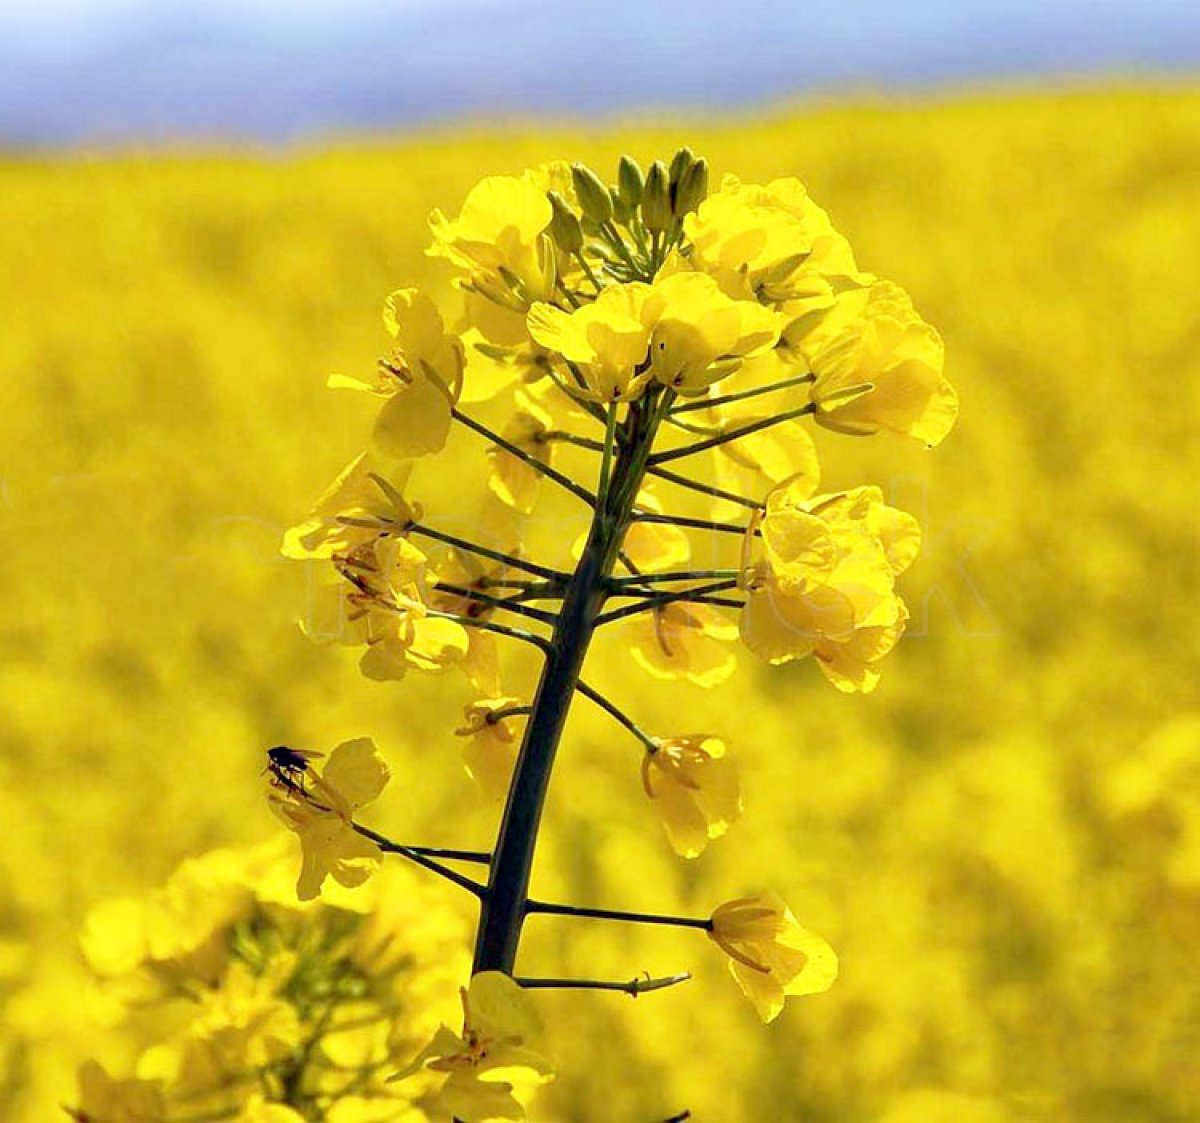 What is canola #2